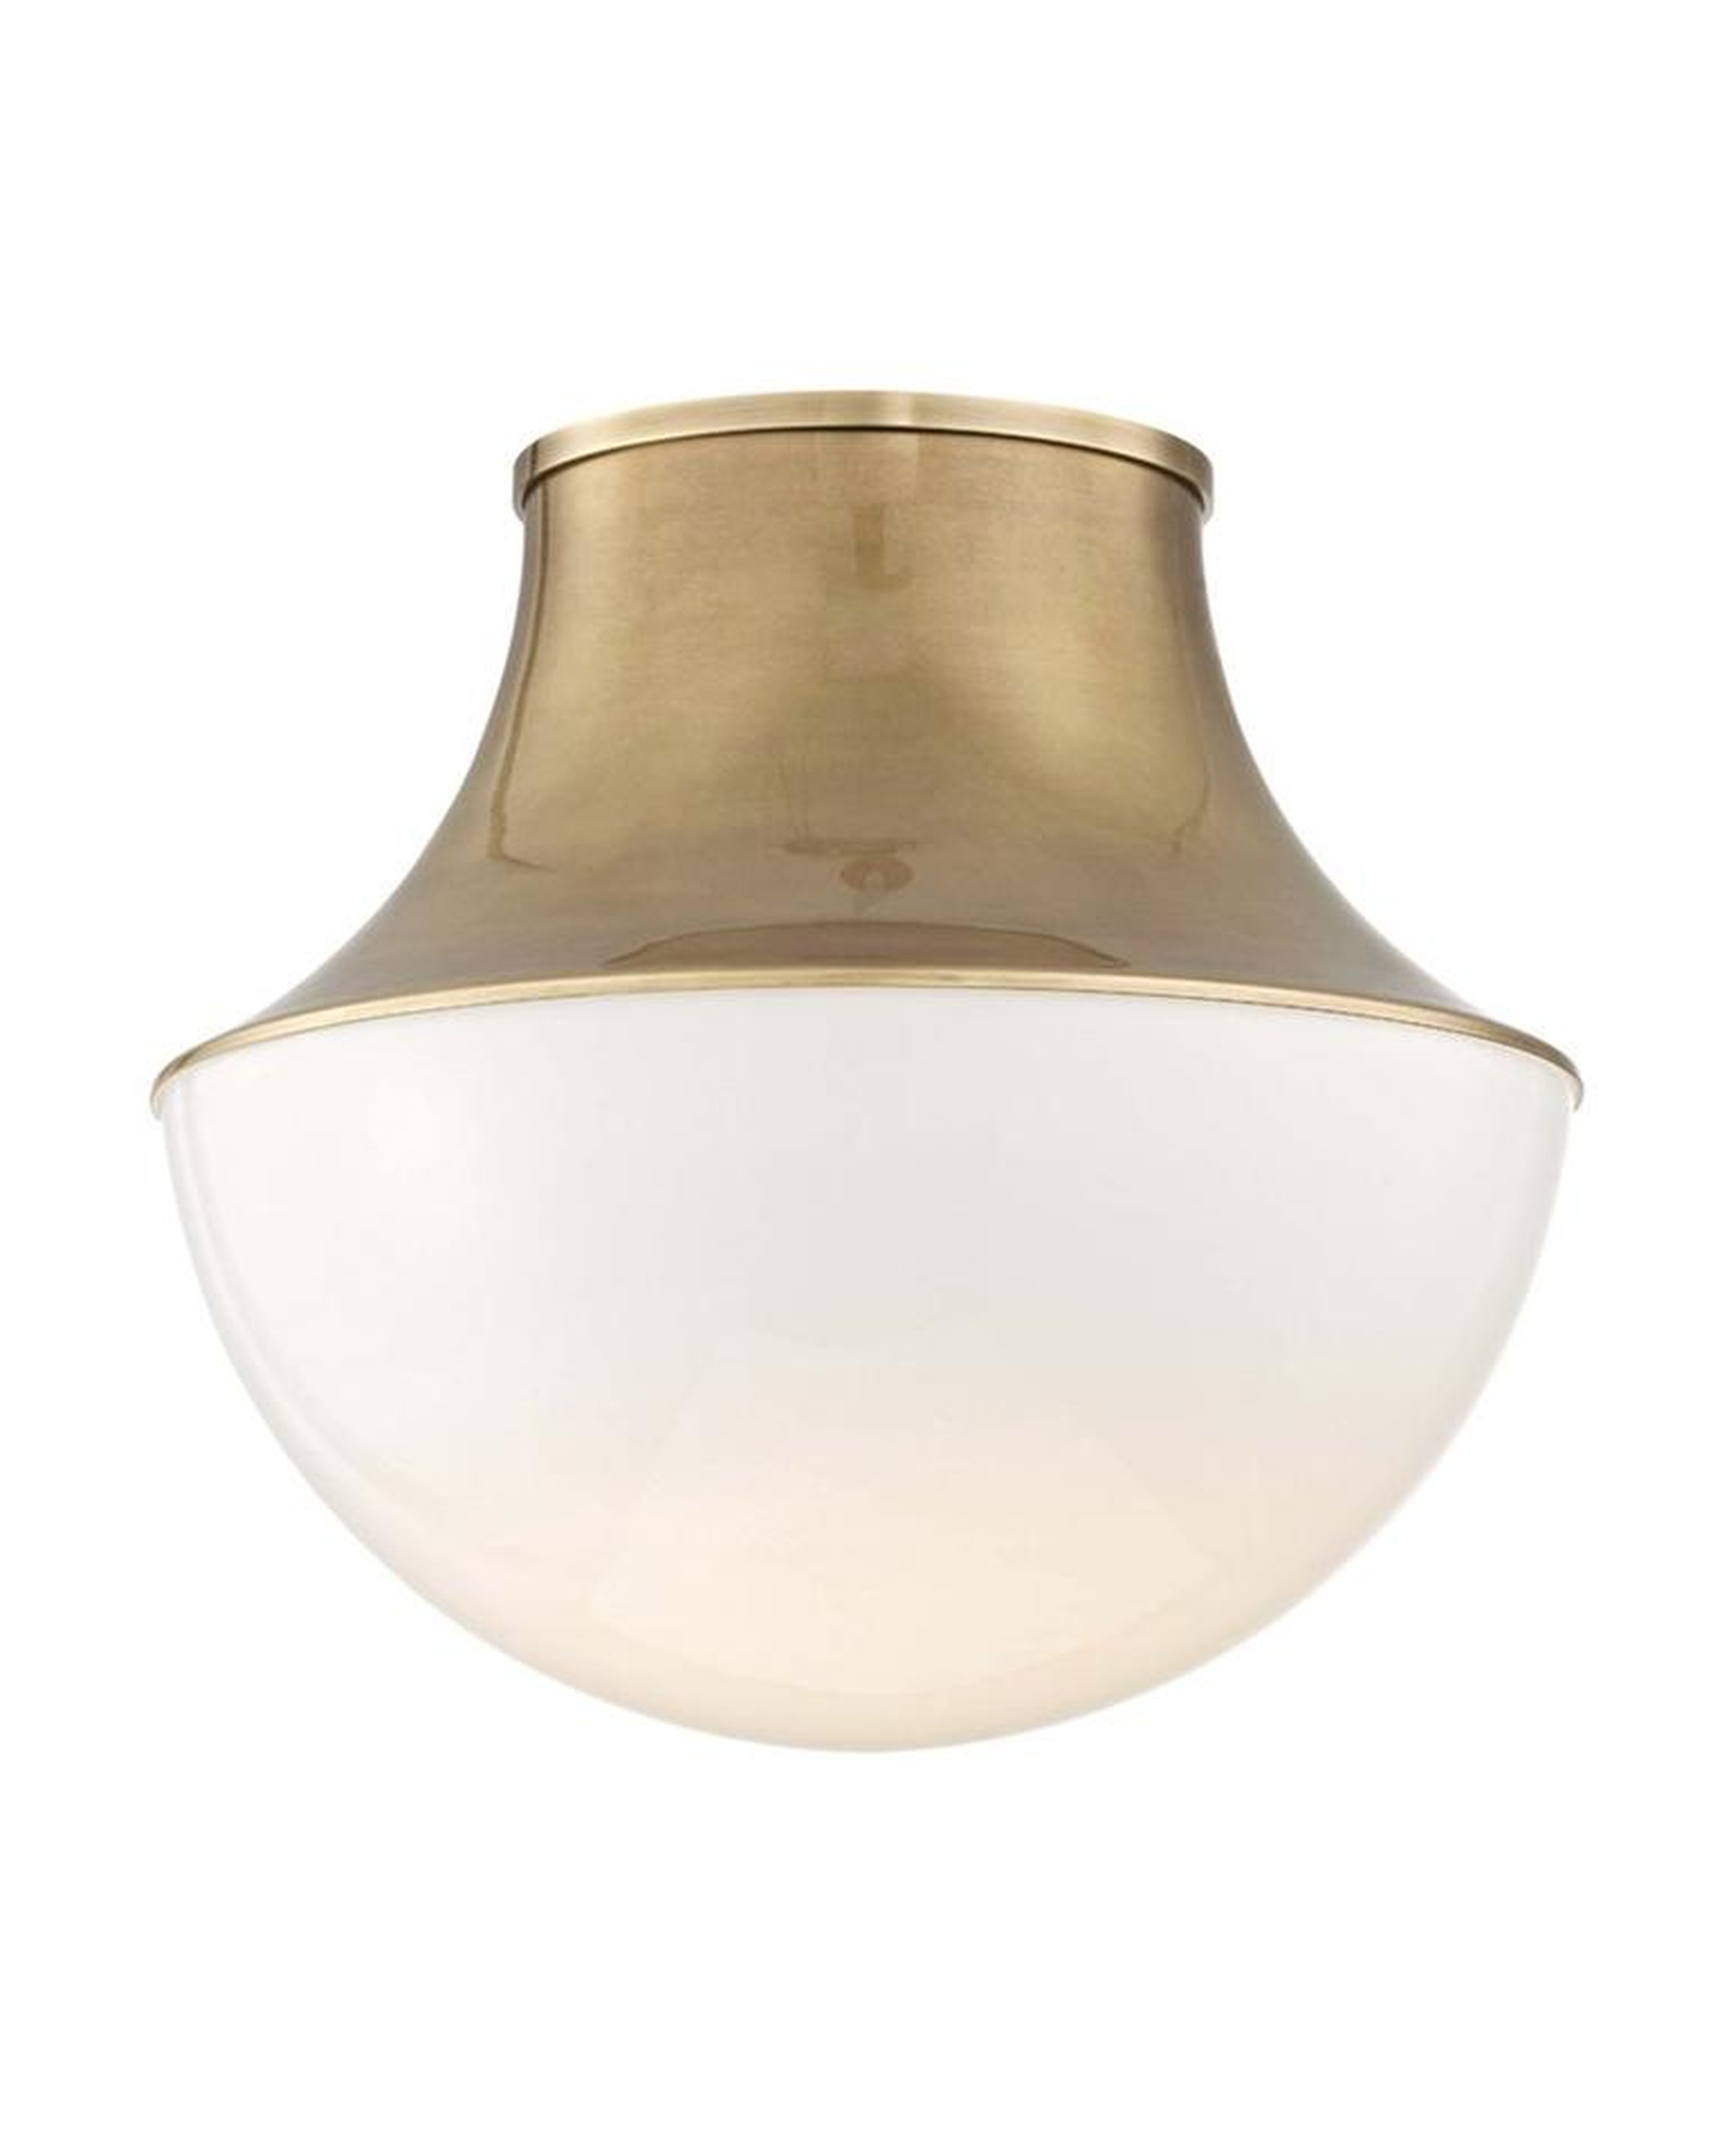 LETTIE FLUSH MOUNT - Aged Brass - McGee & Co.